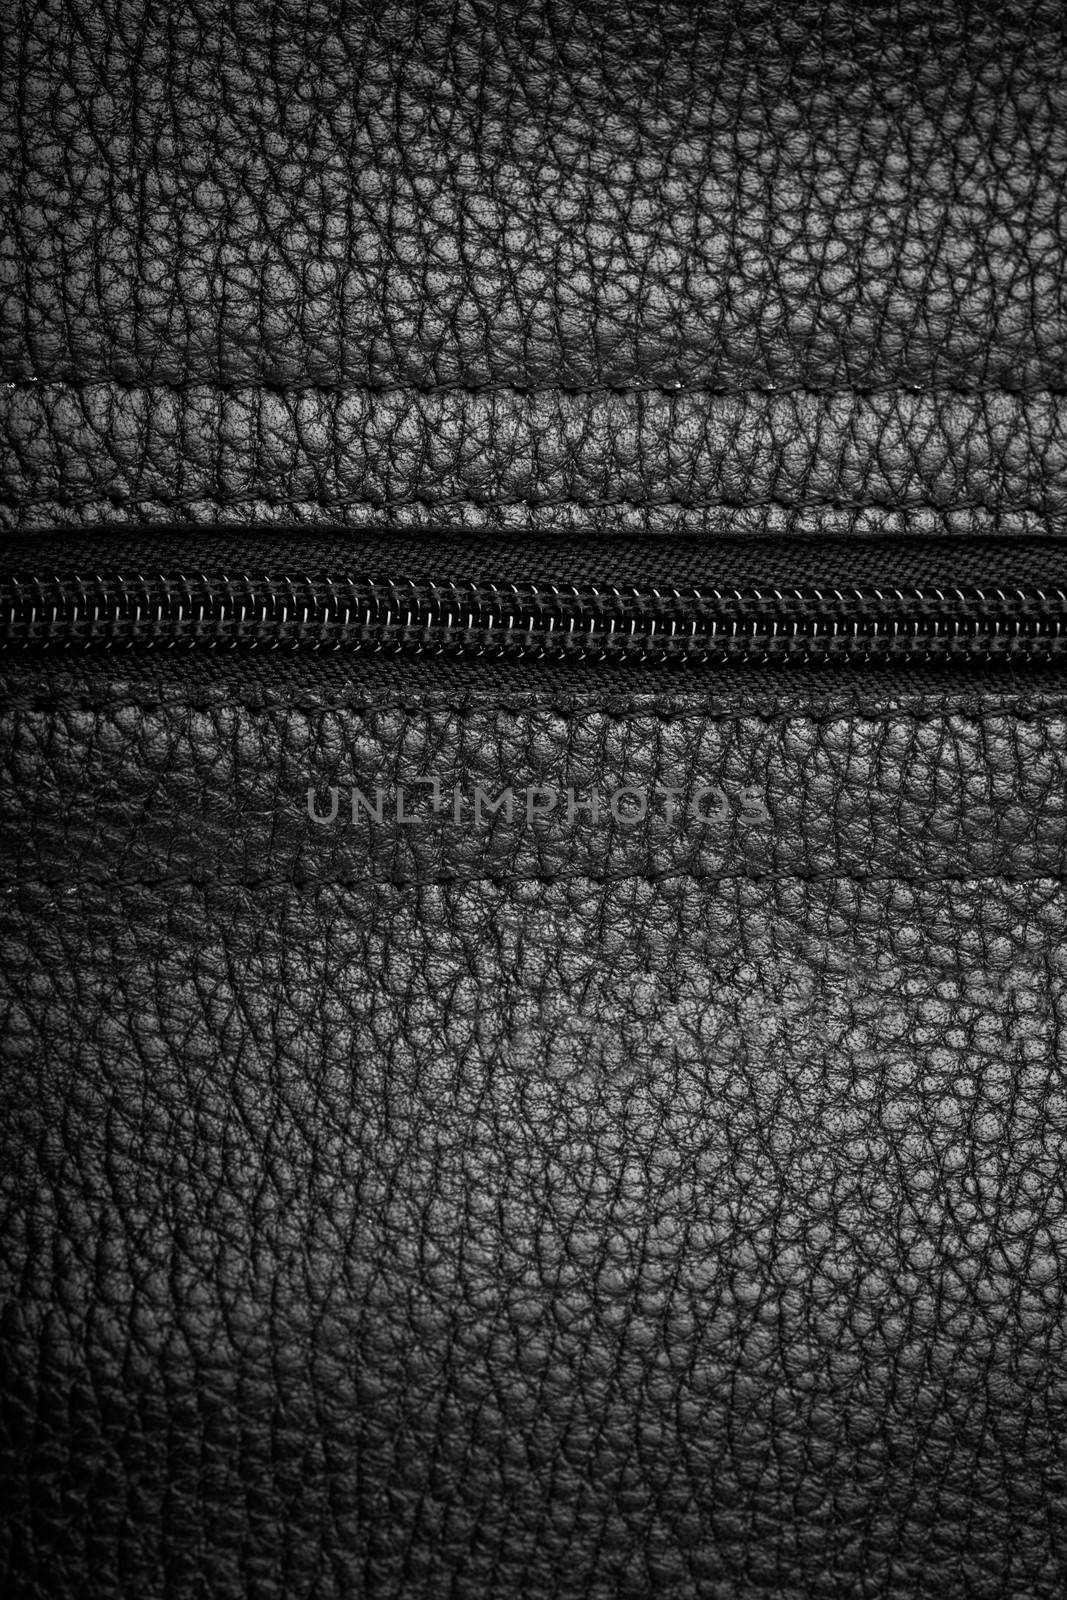 Macro view of black leather background with zipper